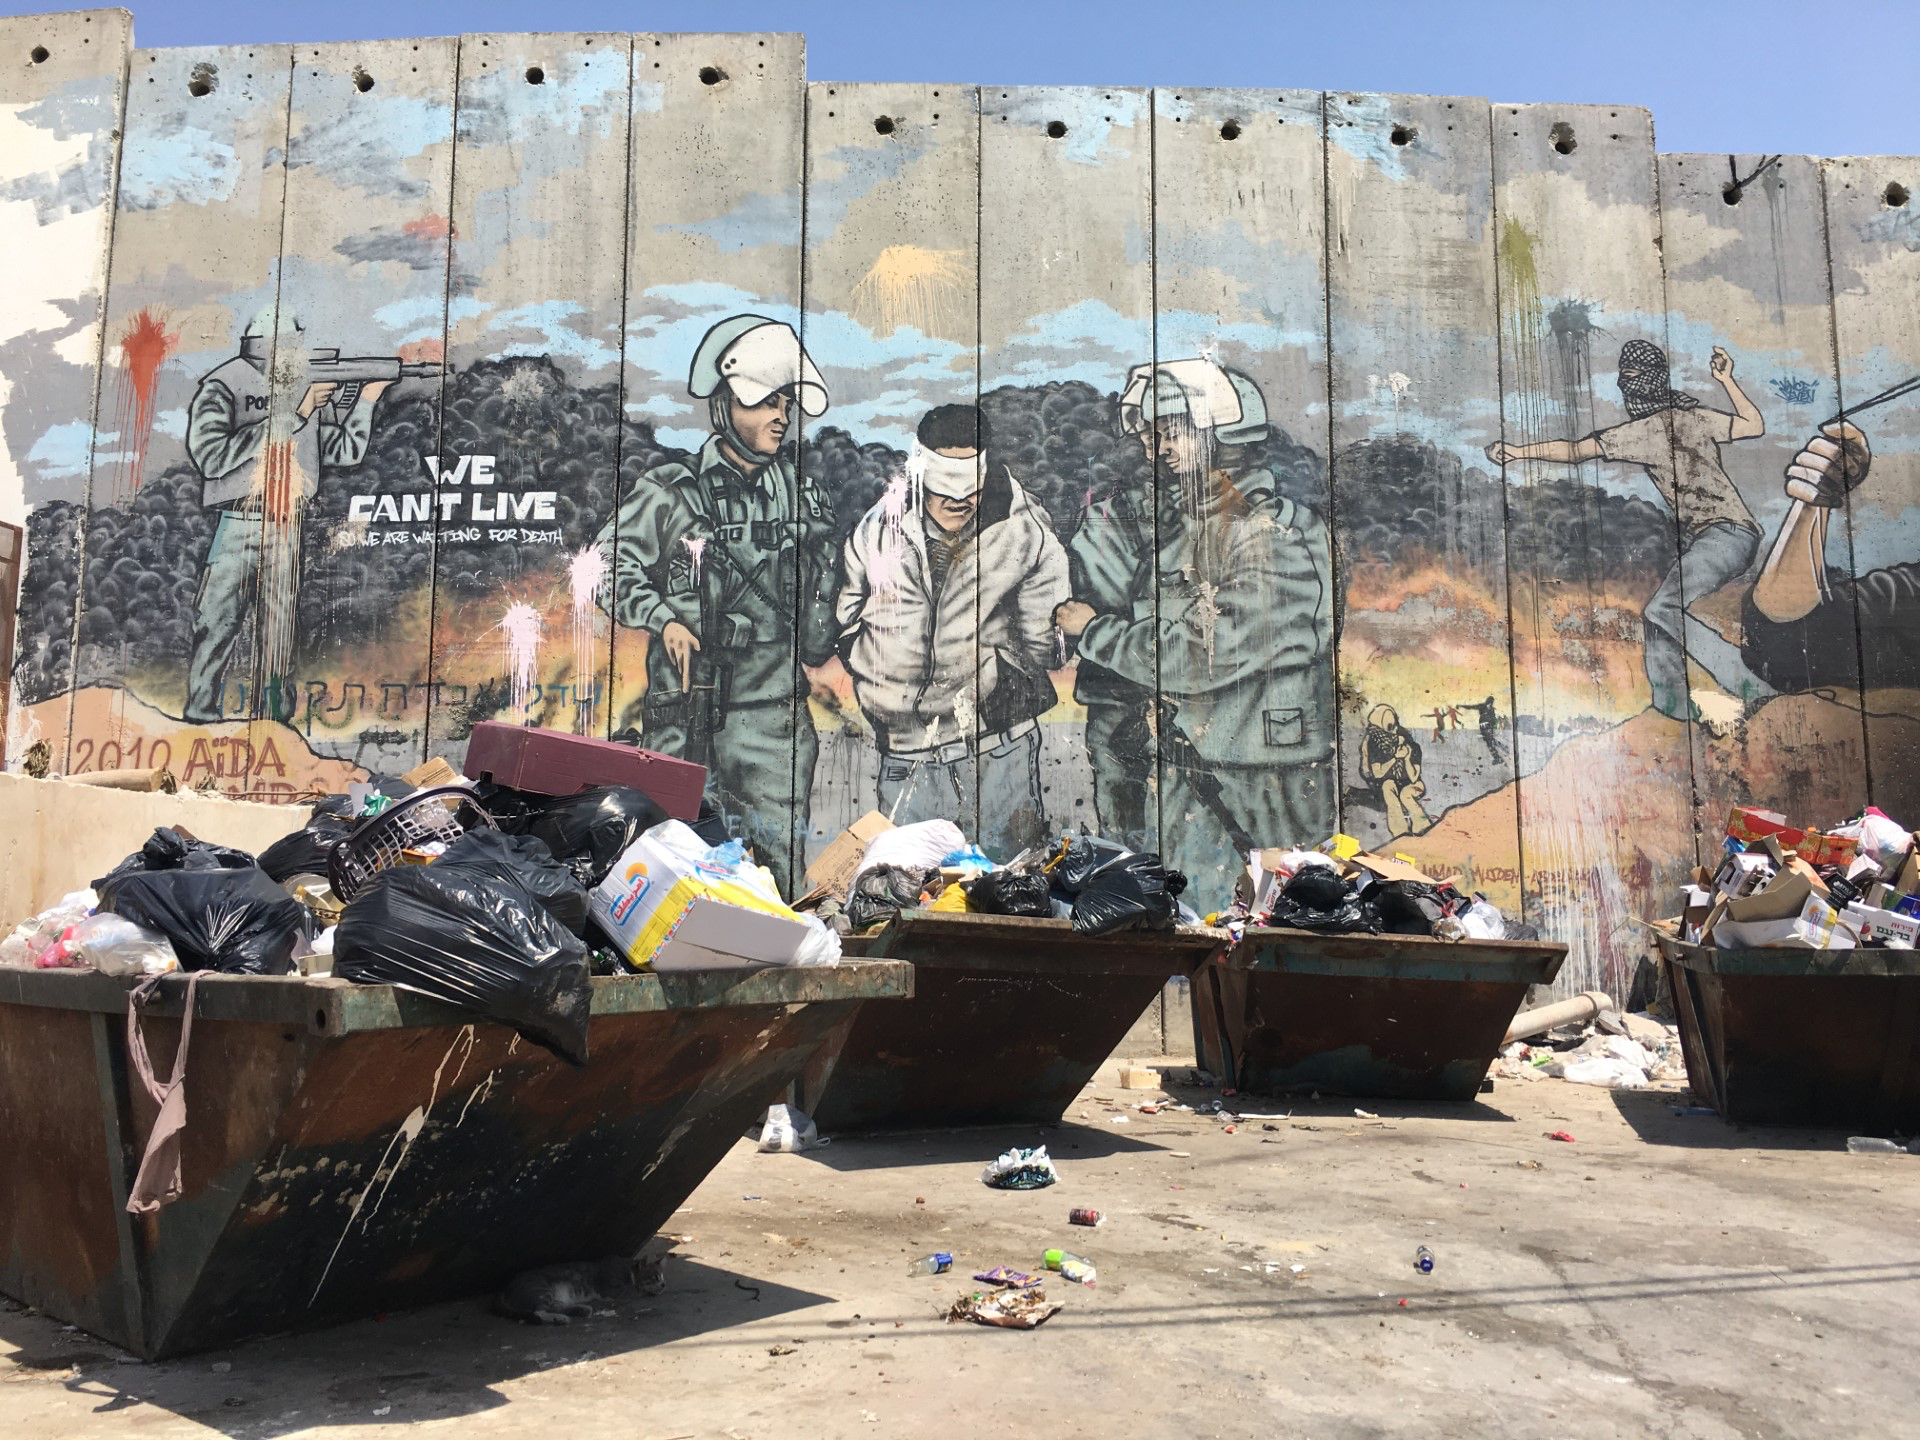 Mural dated 2010 in the Aida refugee camp just outside Bethlehem: “WE CAN’T LIVE. So We Are Waiting For Death.” 